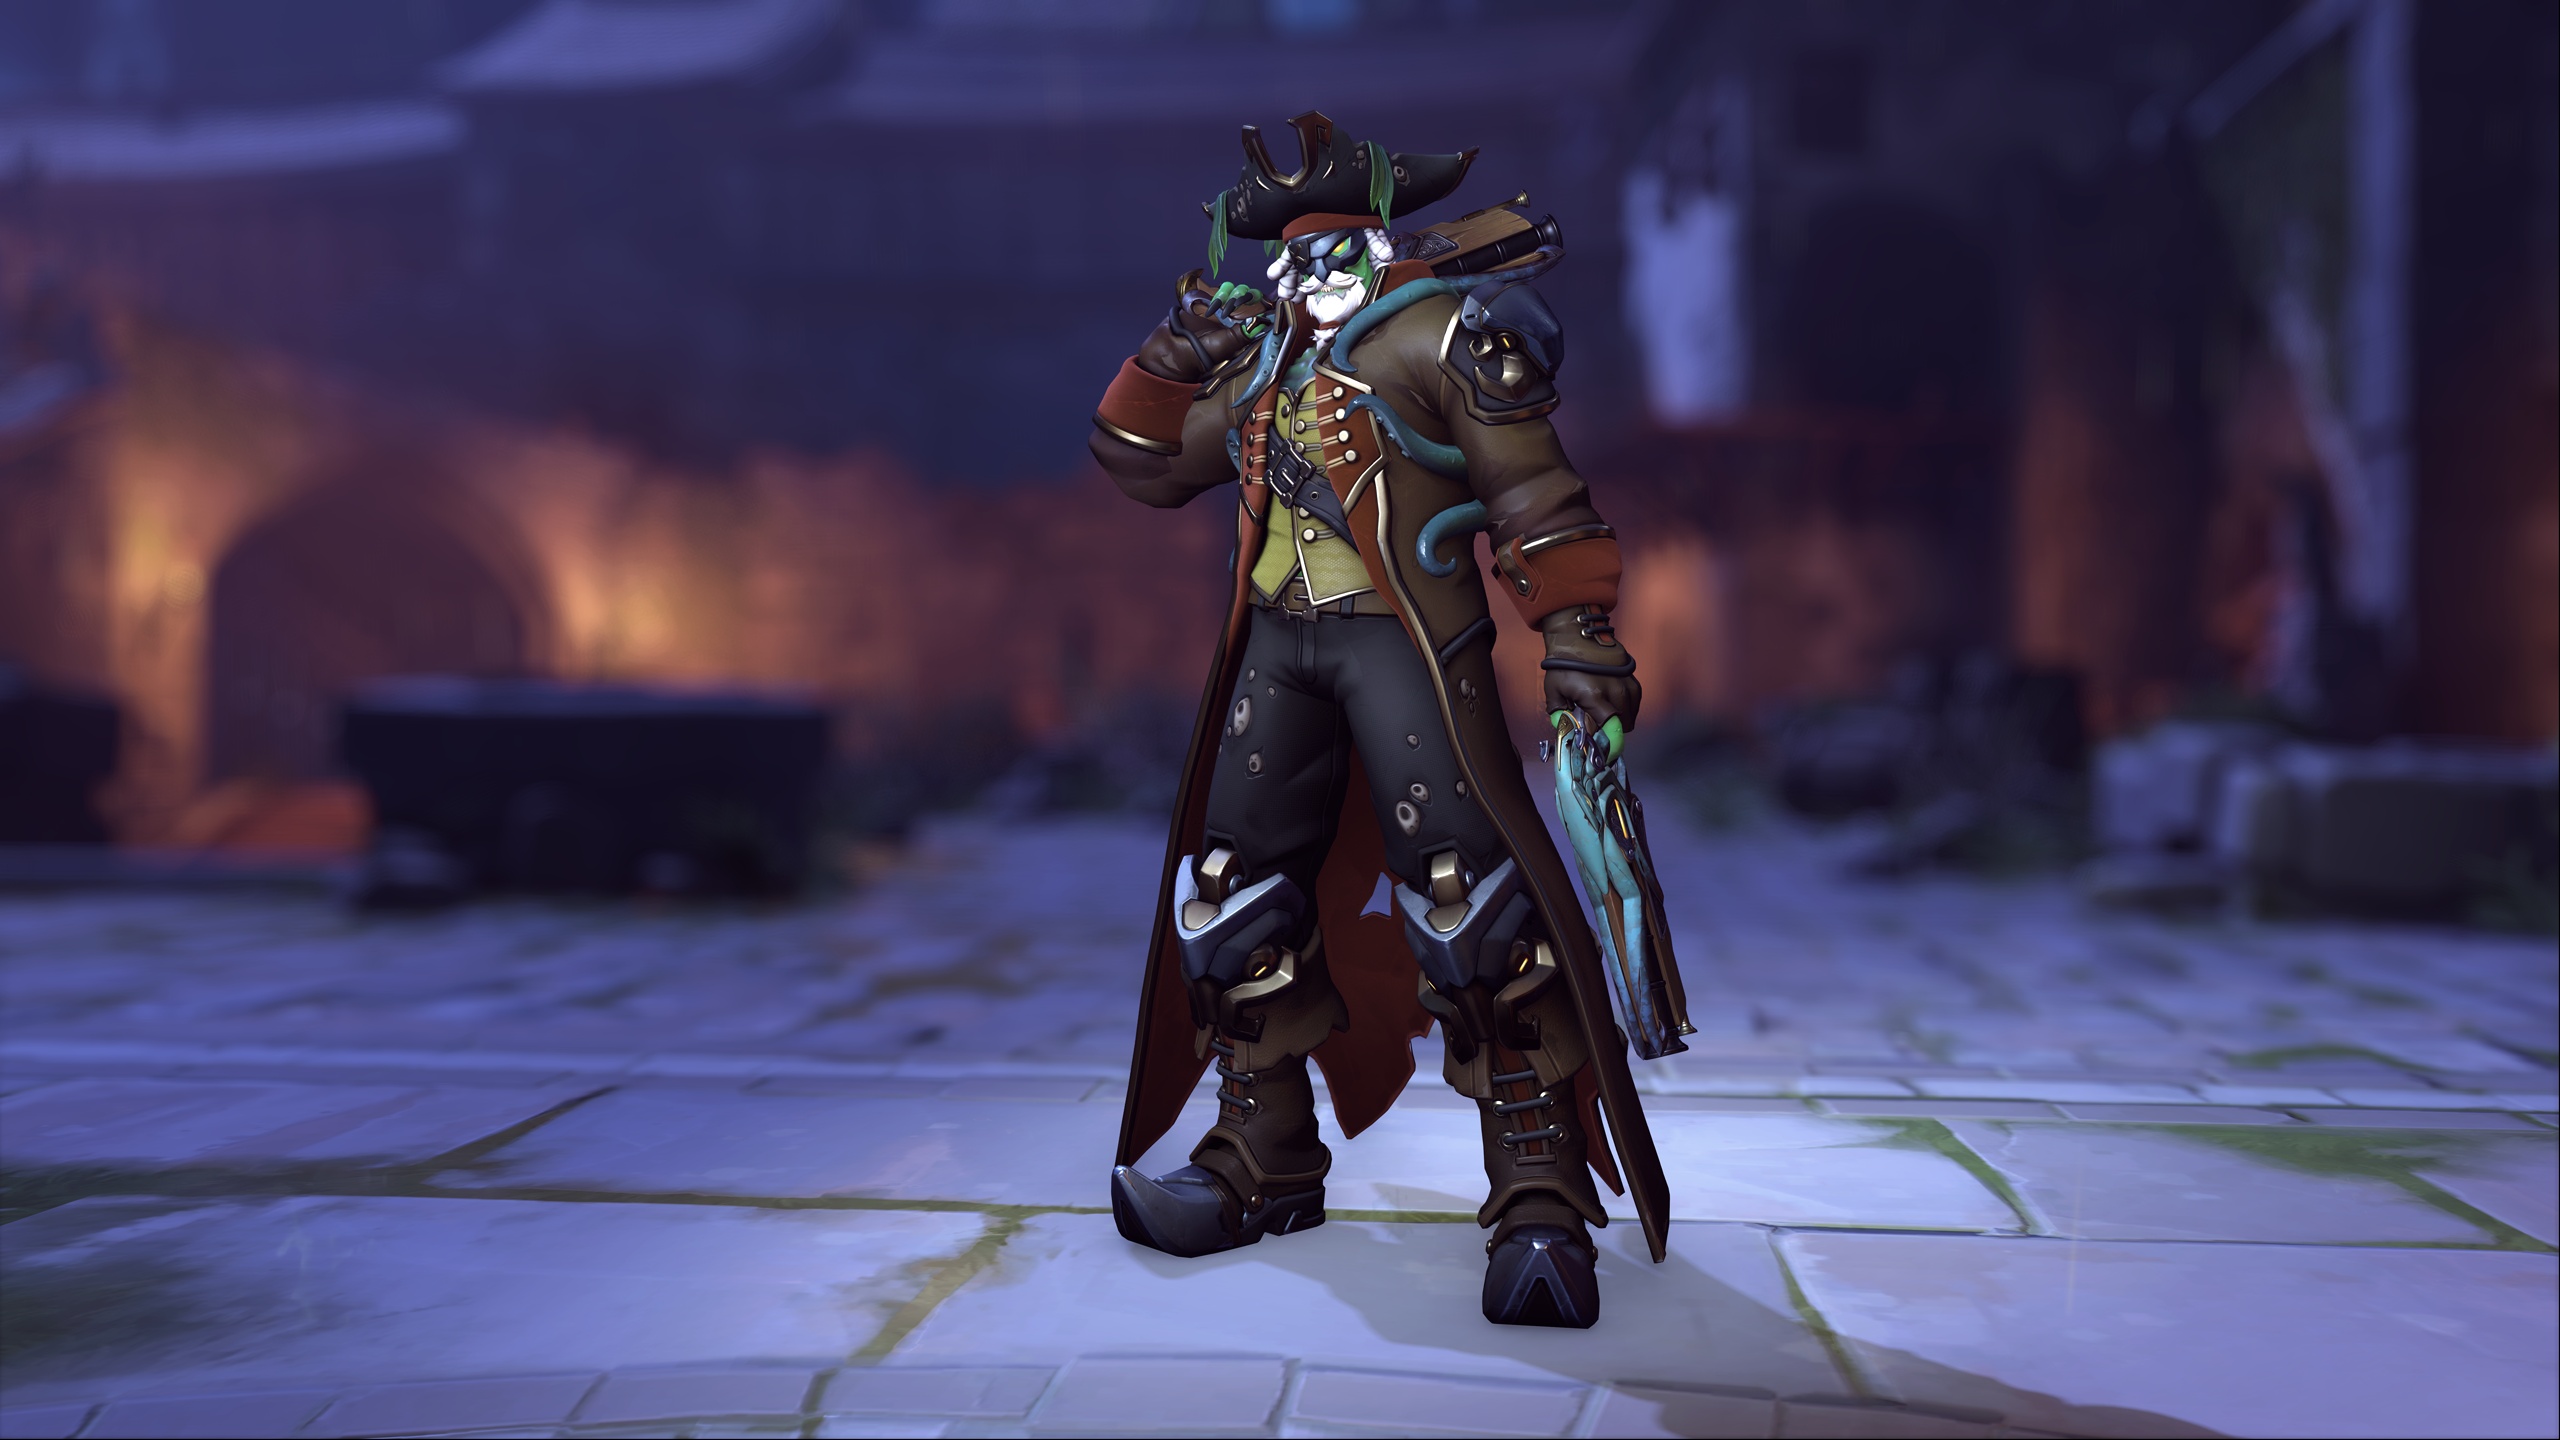 Overwatch 2 Free Legendary Reaper Skin and Double XP Coming Soon - Wowhead  News